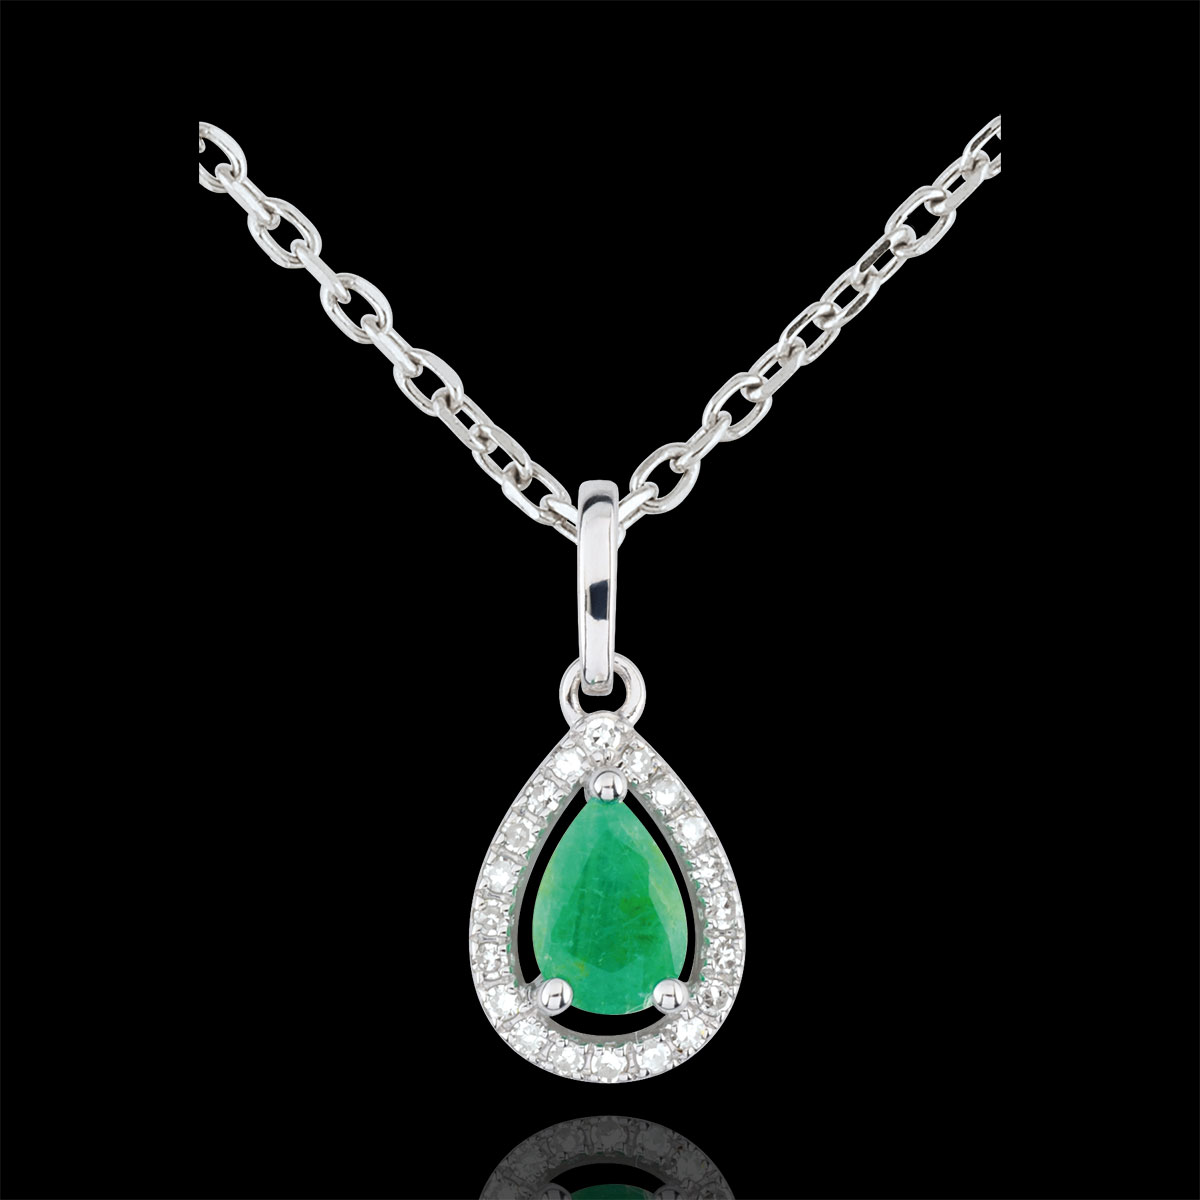 Pear-shaped Indian Emerald Pendant : Edenly jewellery